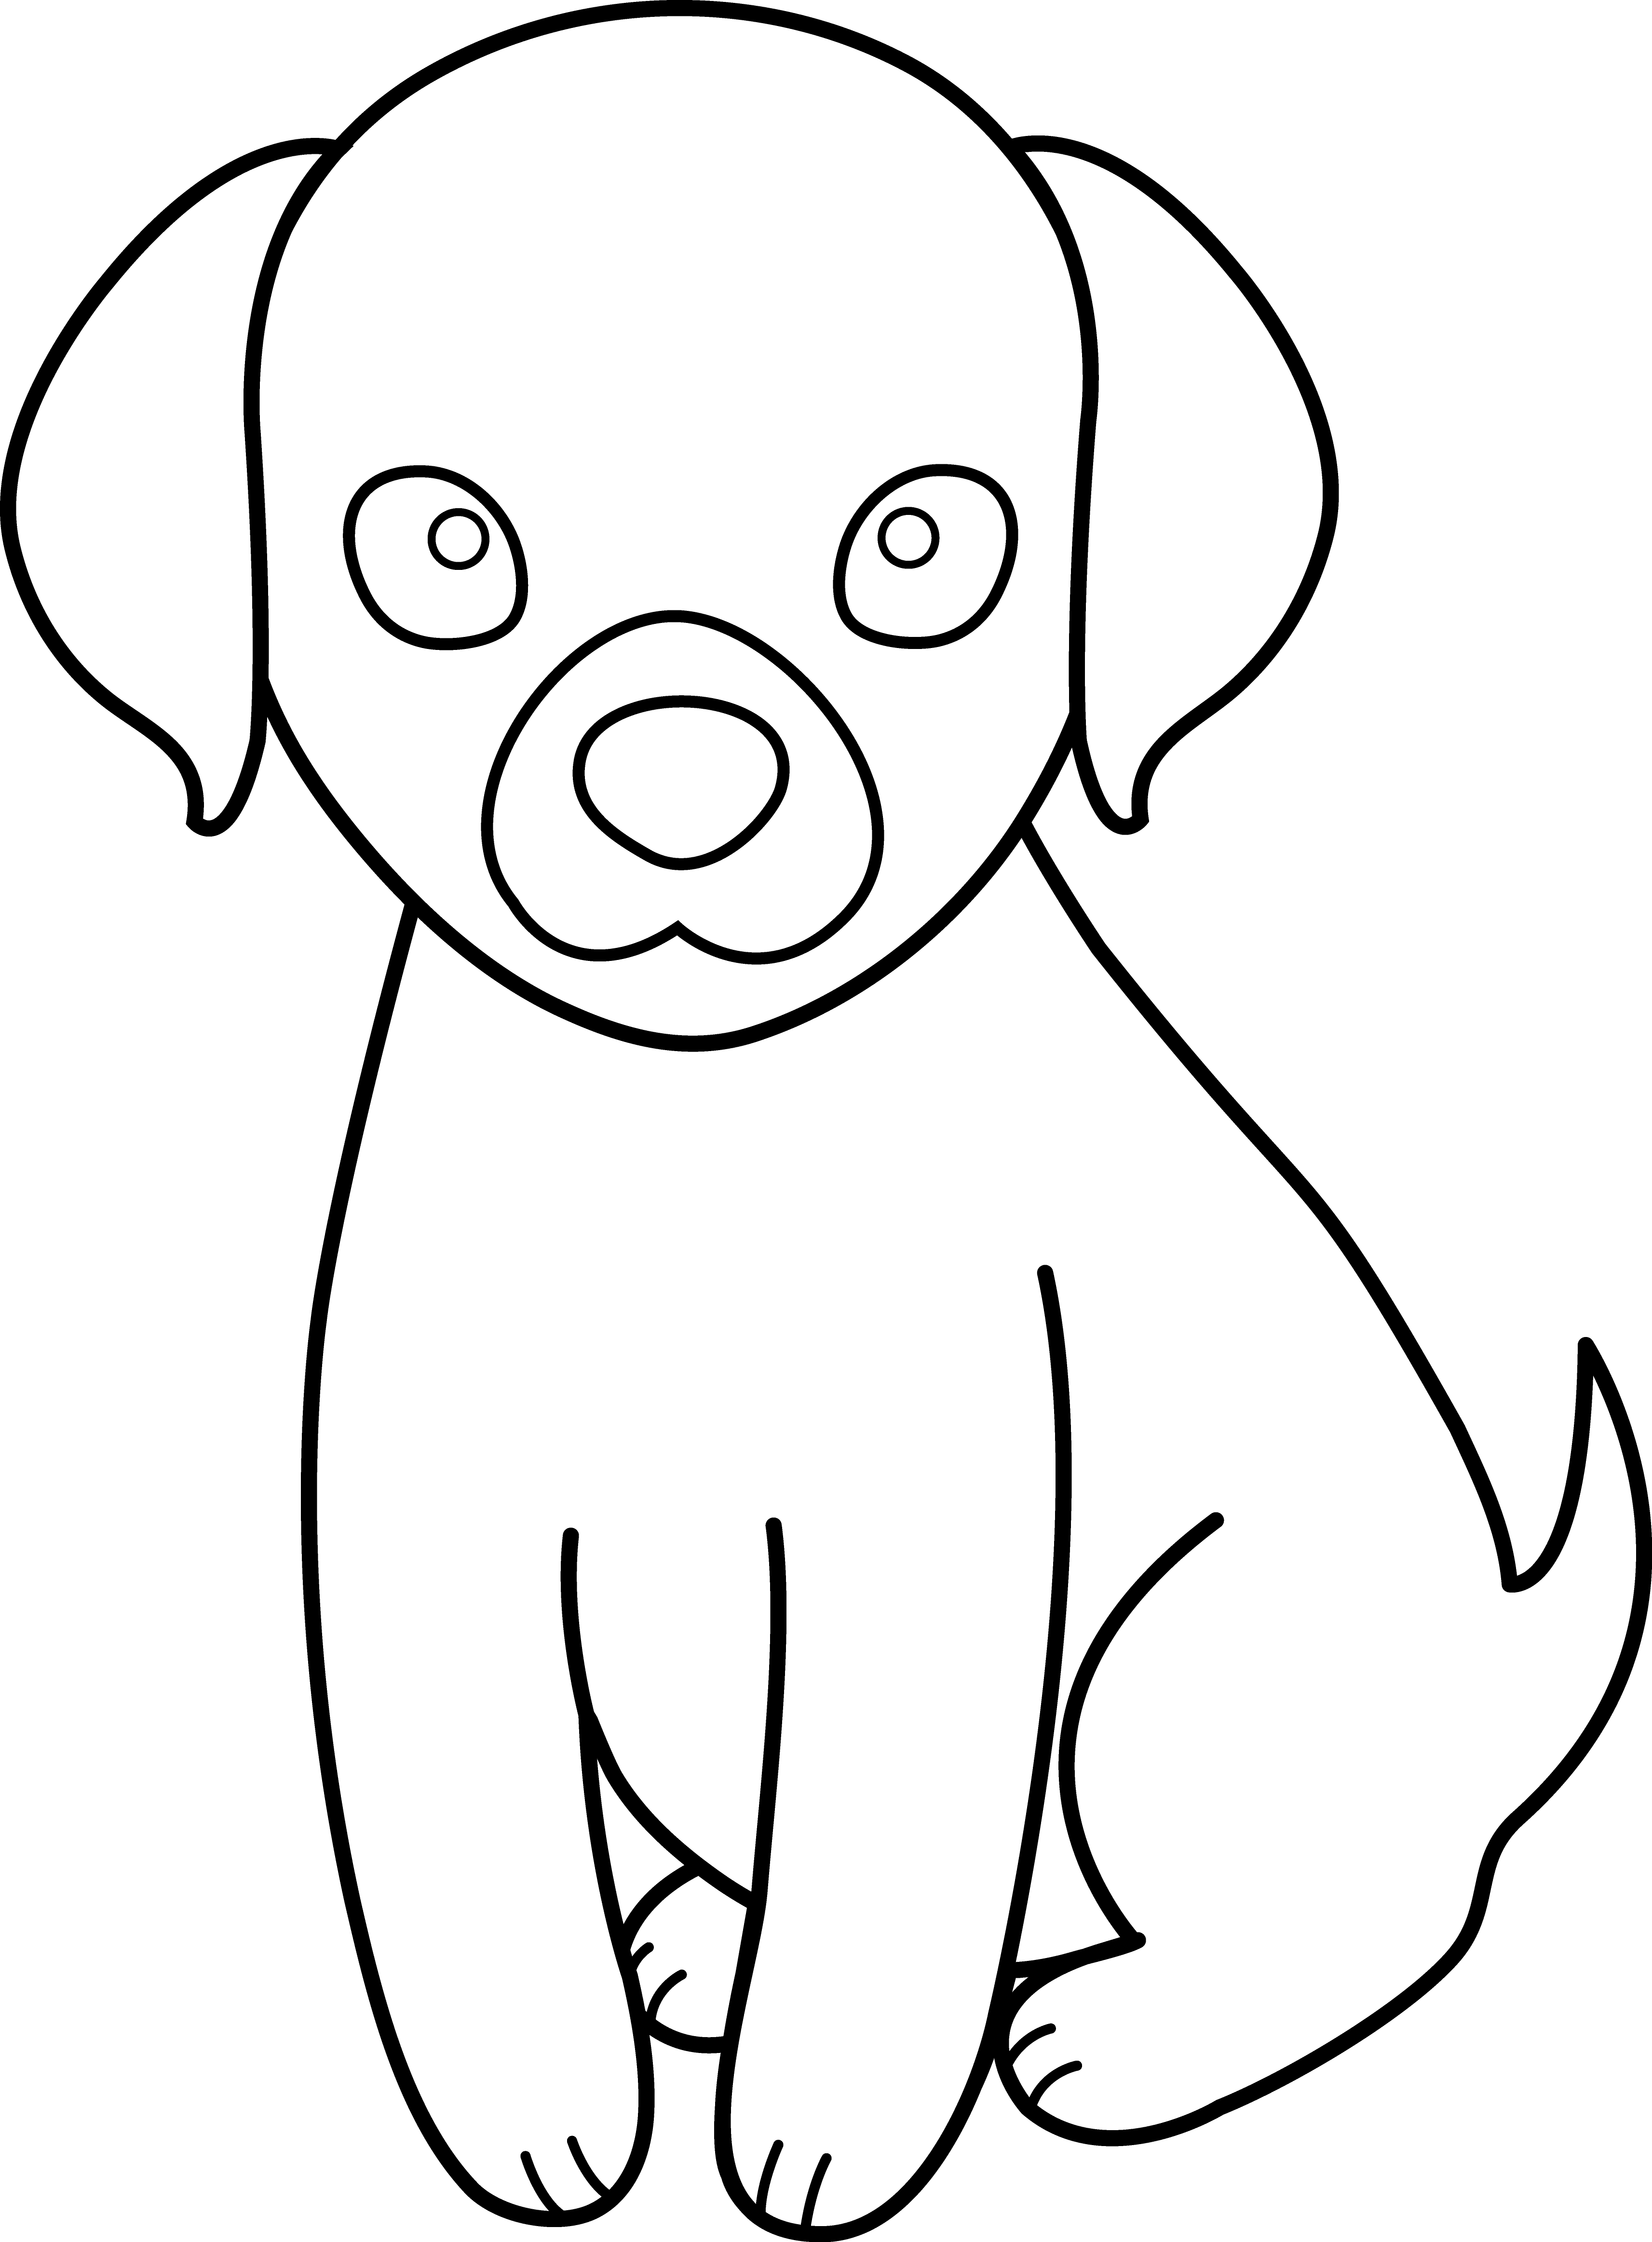 Free Easy Puppy Cliparts, Download Free Easy Puppy Cliparts png images